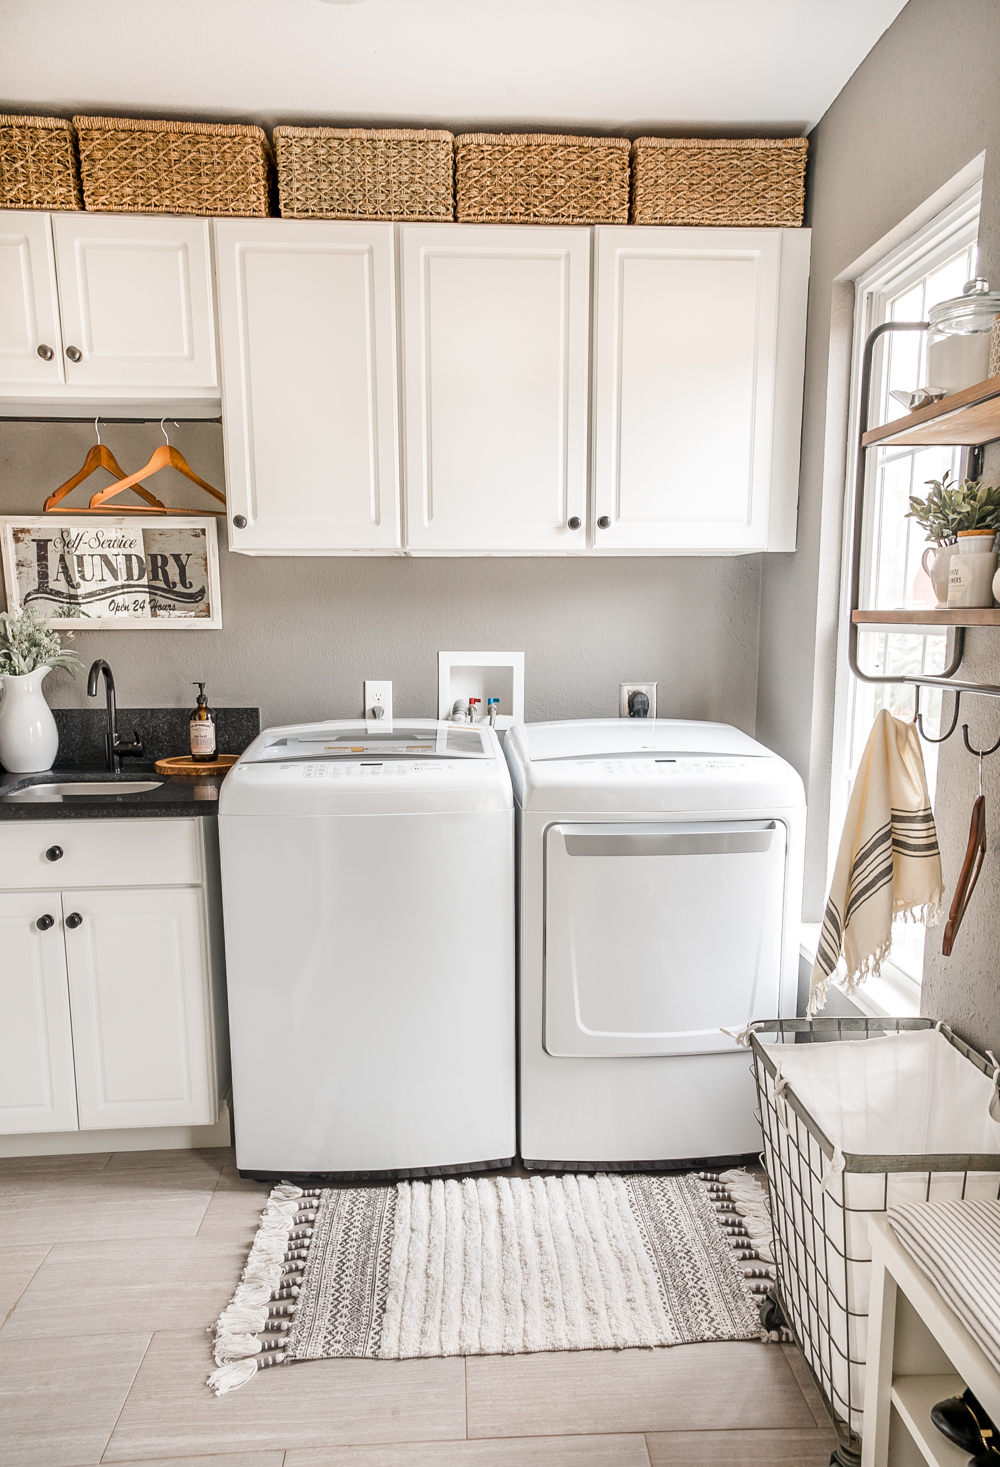 Laundry Room Storage Solutions: Creative Organizers for a Small